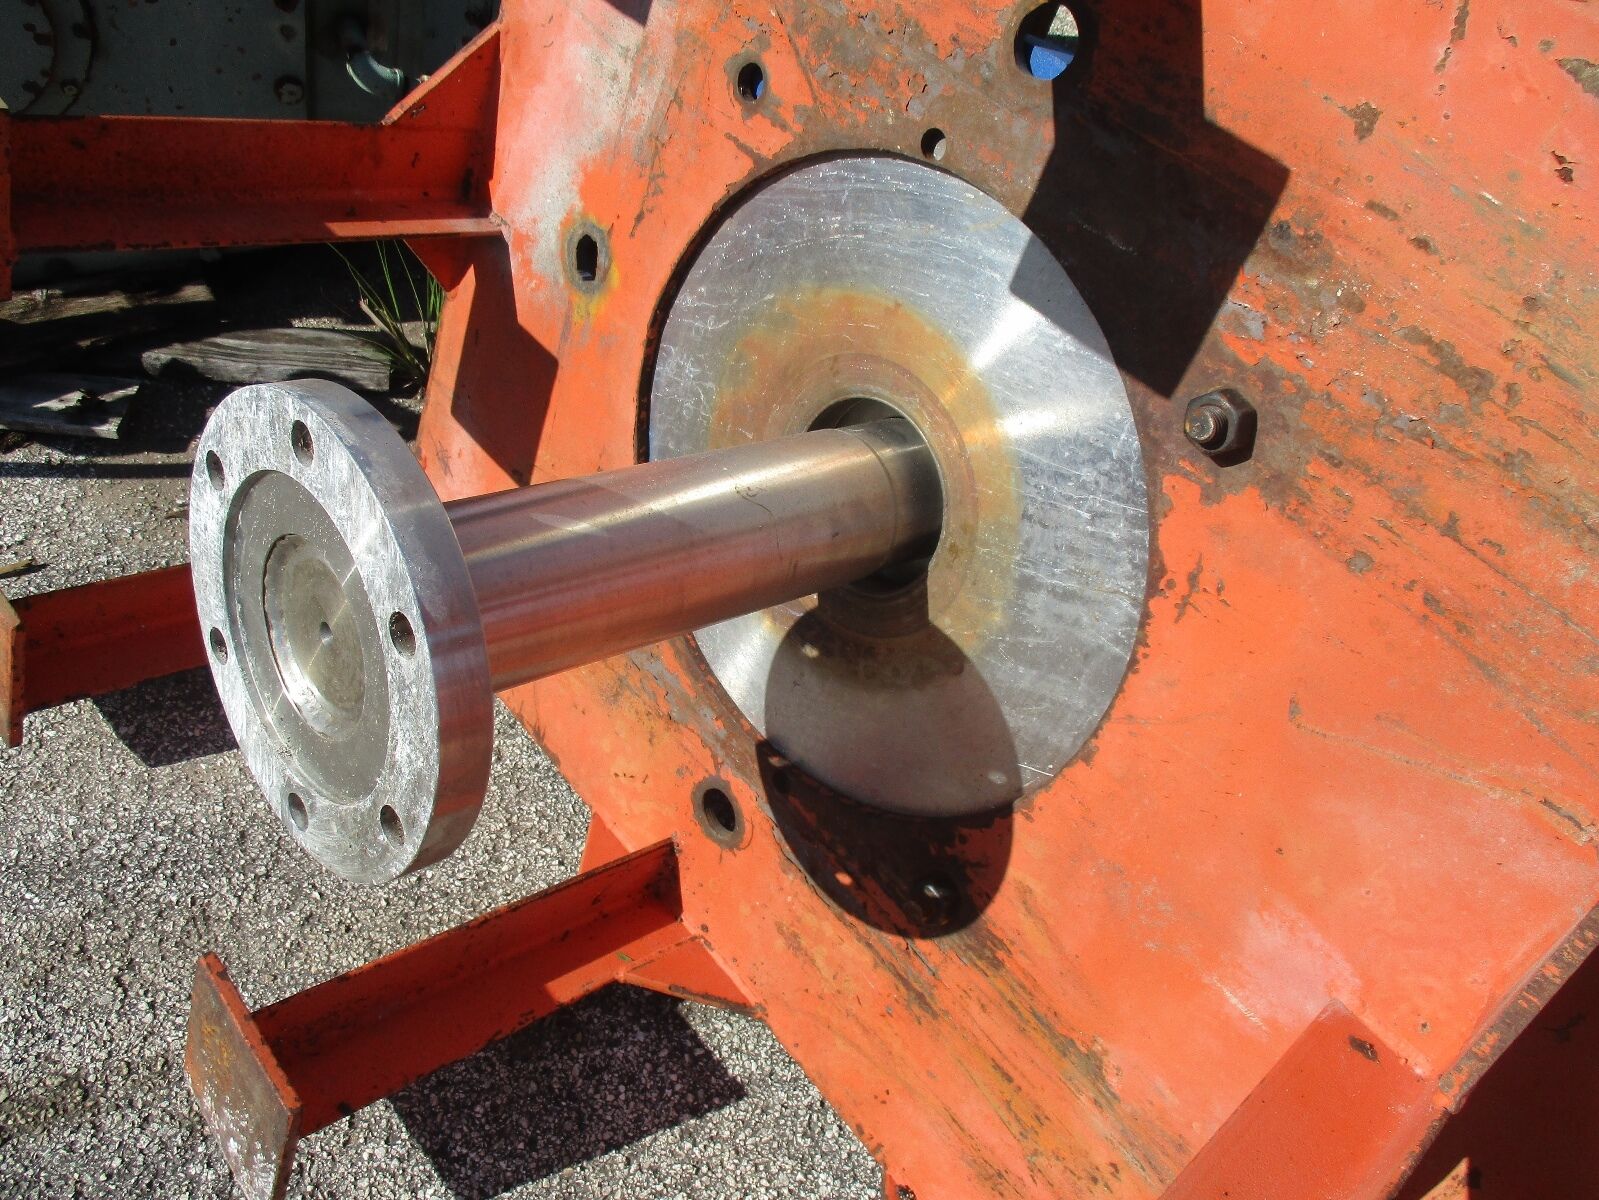 Chemineer stainless steel mixing shaft with flange coupling